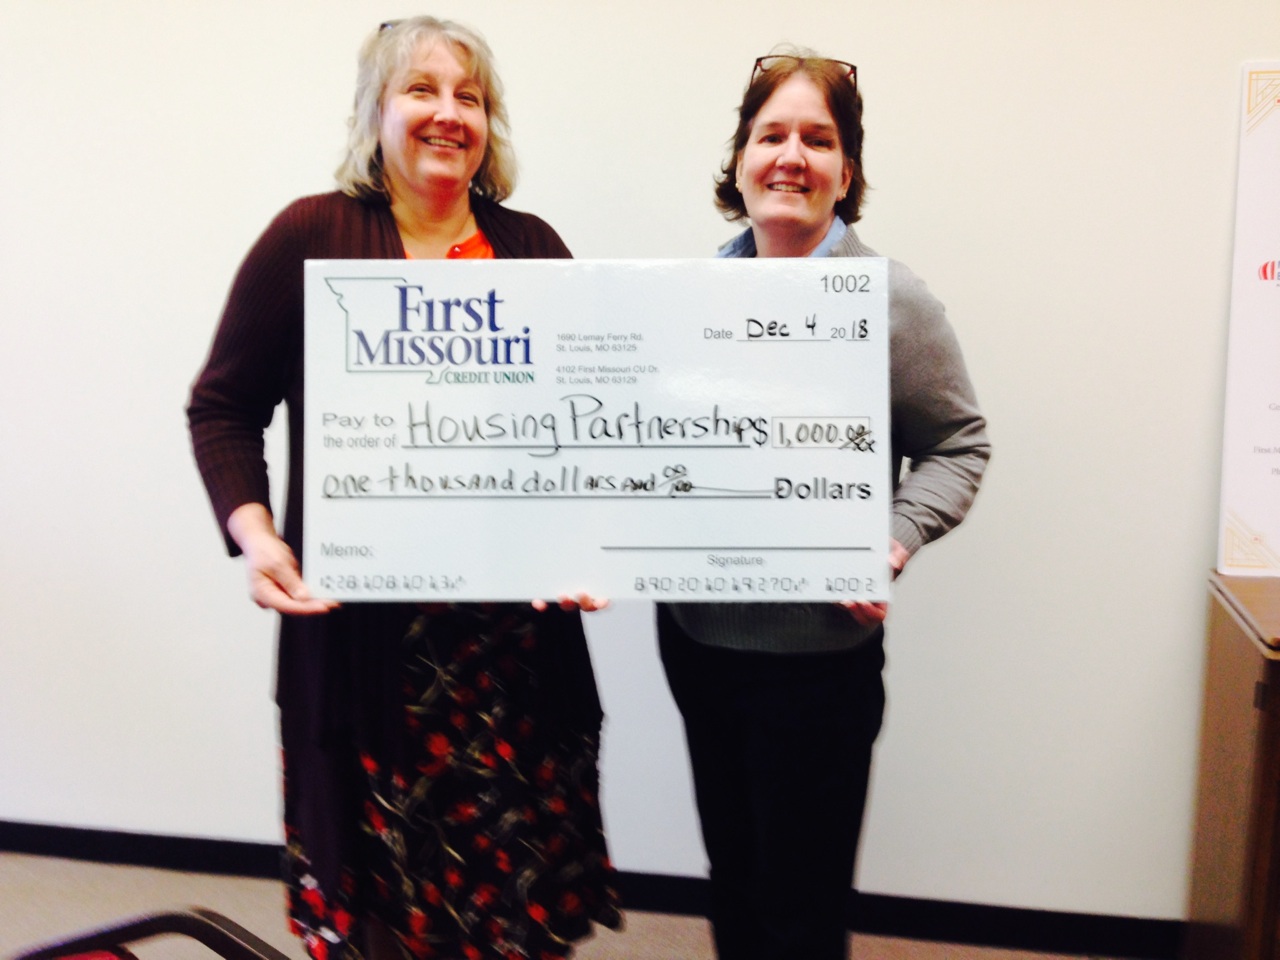 Housing Partnership received $1,000 for its consumer education!